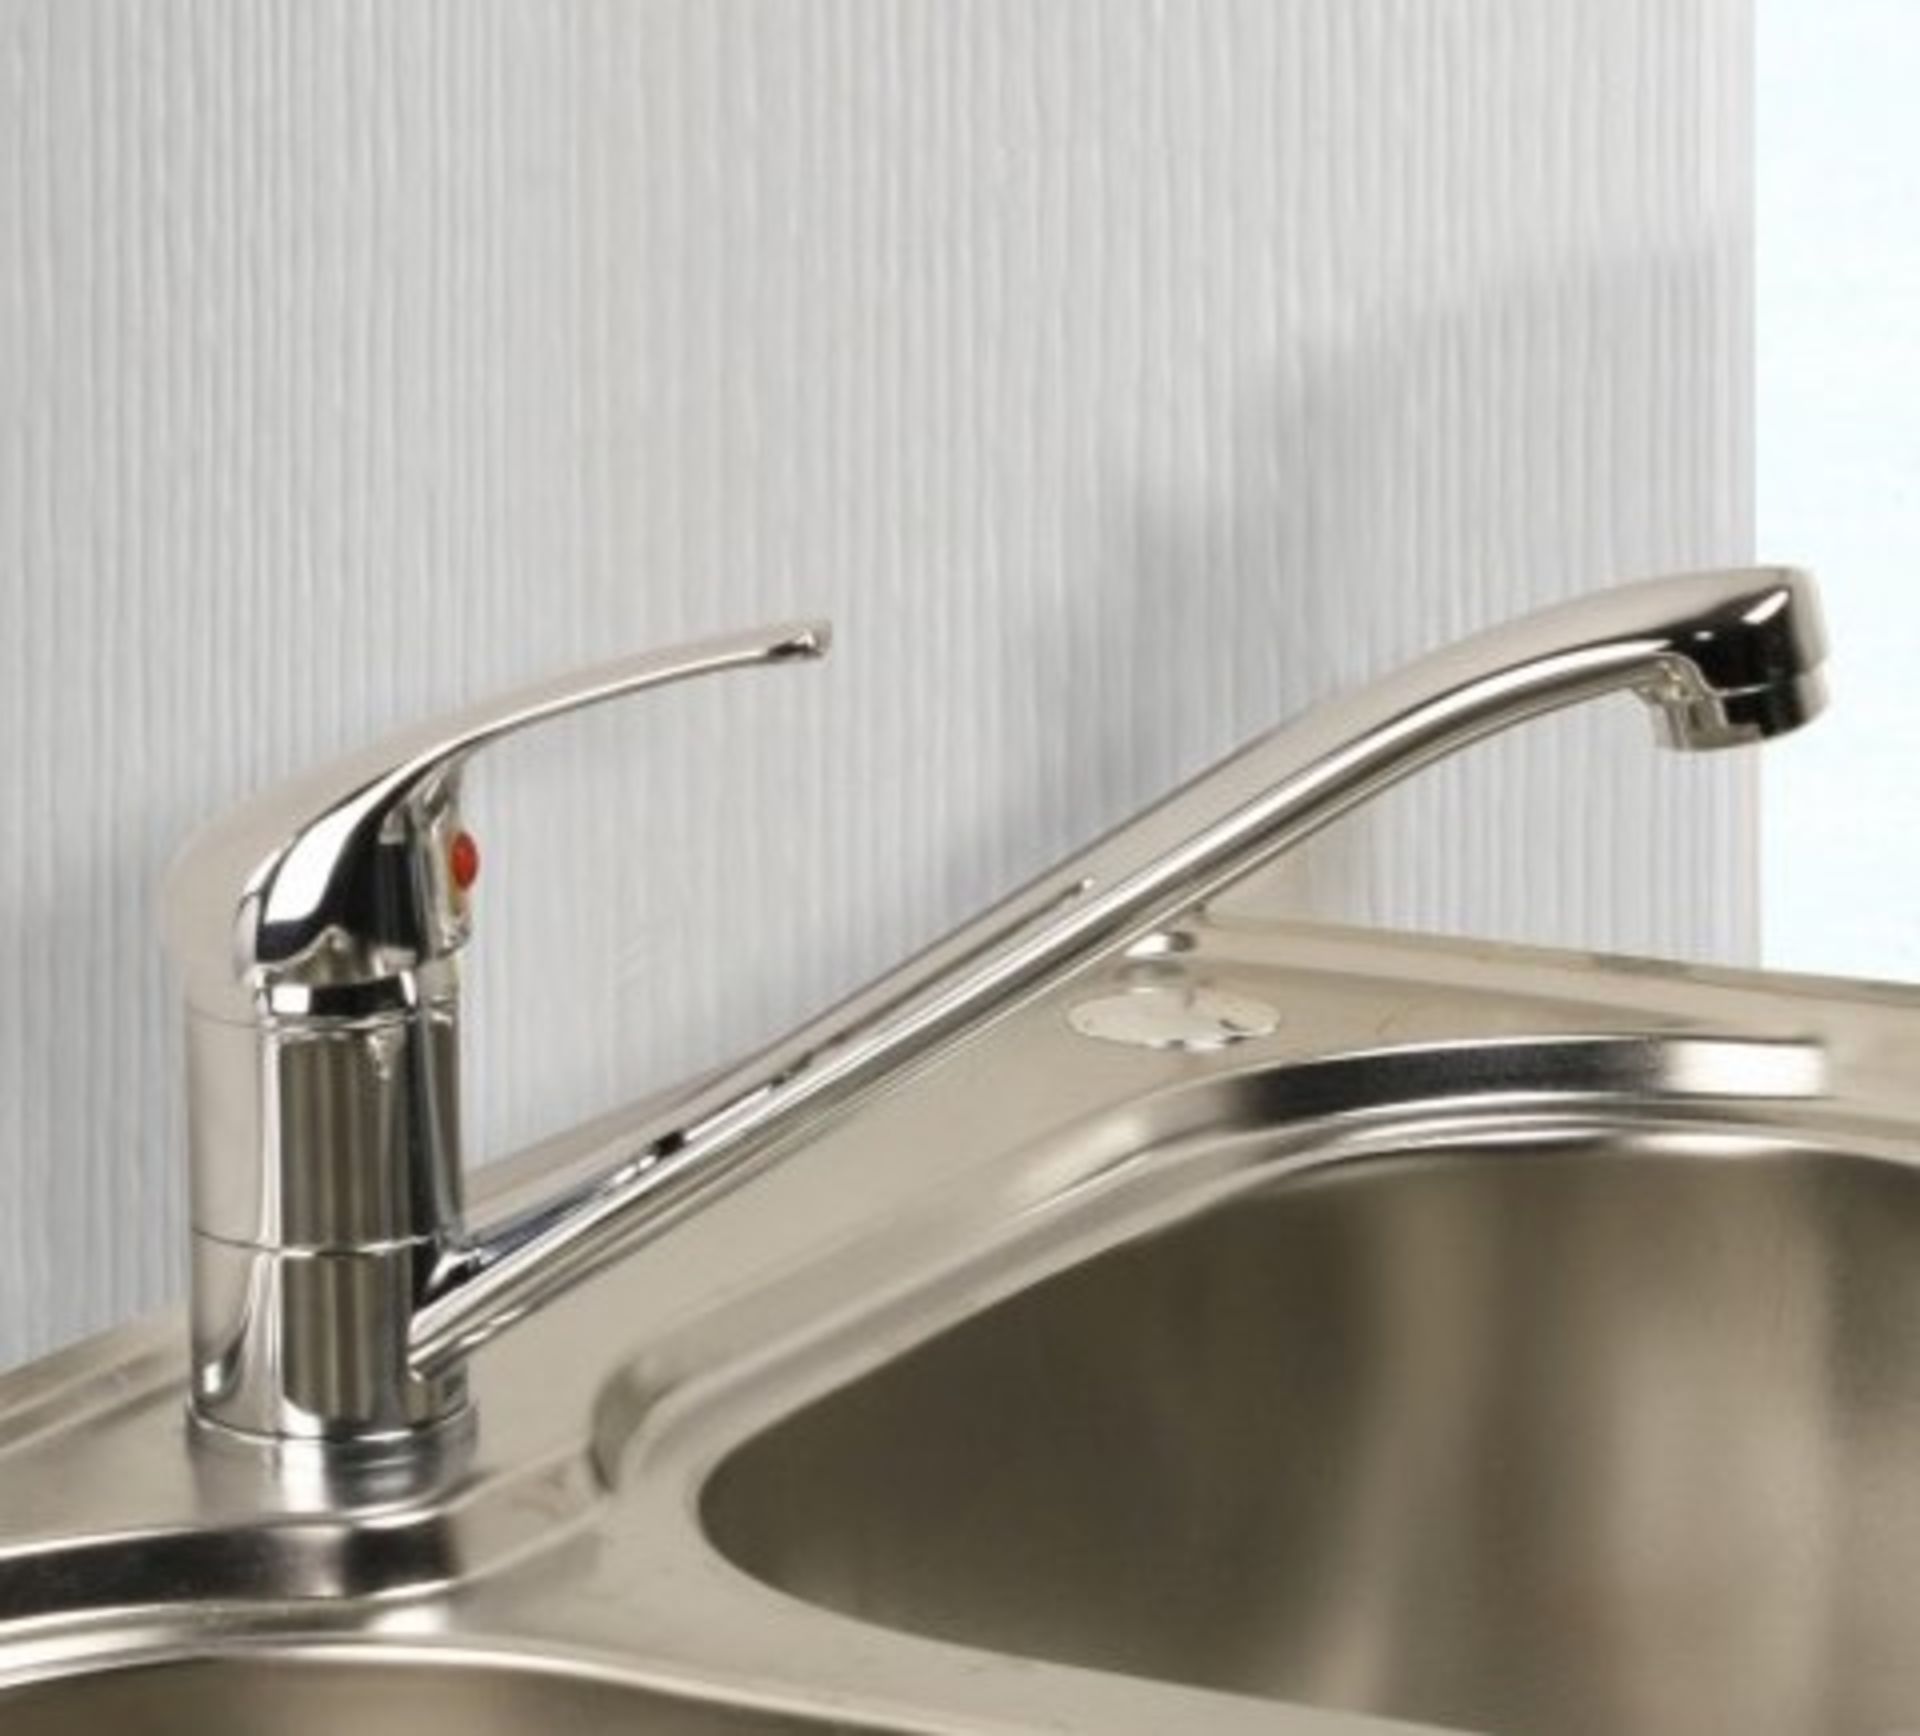 AA102- Tessa Chrome Plated Kitchen Mixer Tap - Swivel Spout The lengthy, bold design of the Tessa - Image 2 of 3